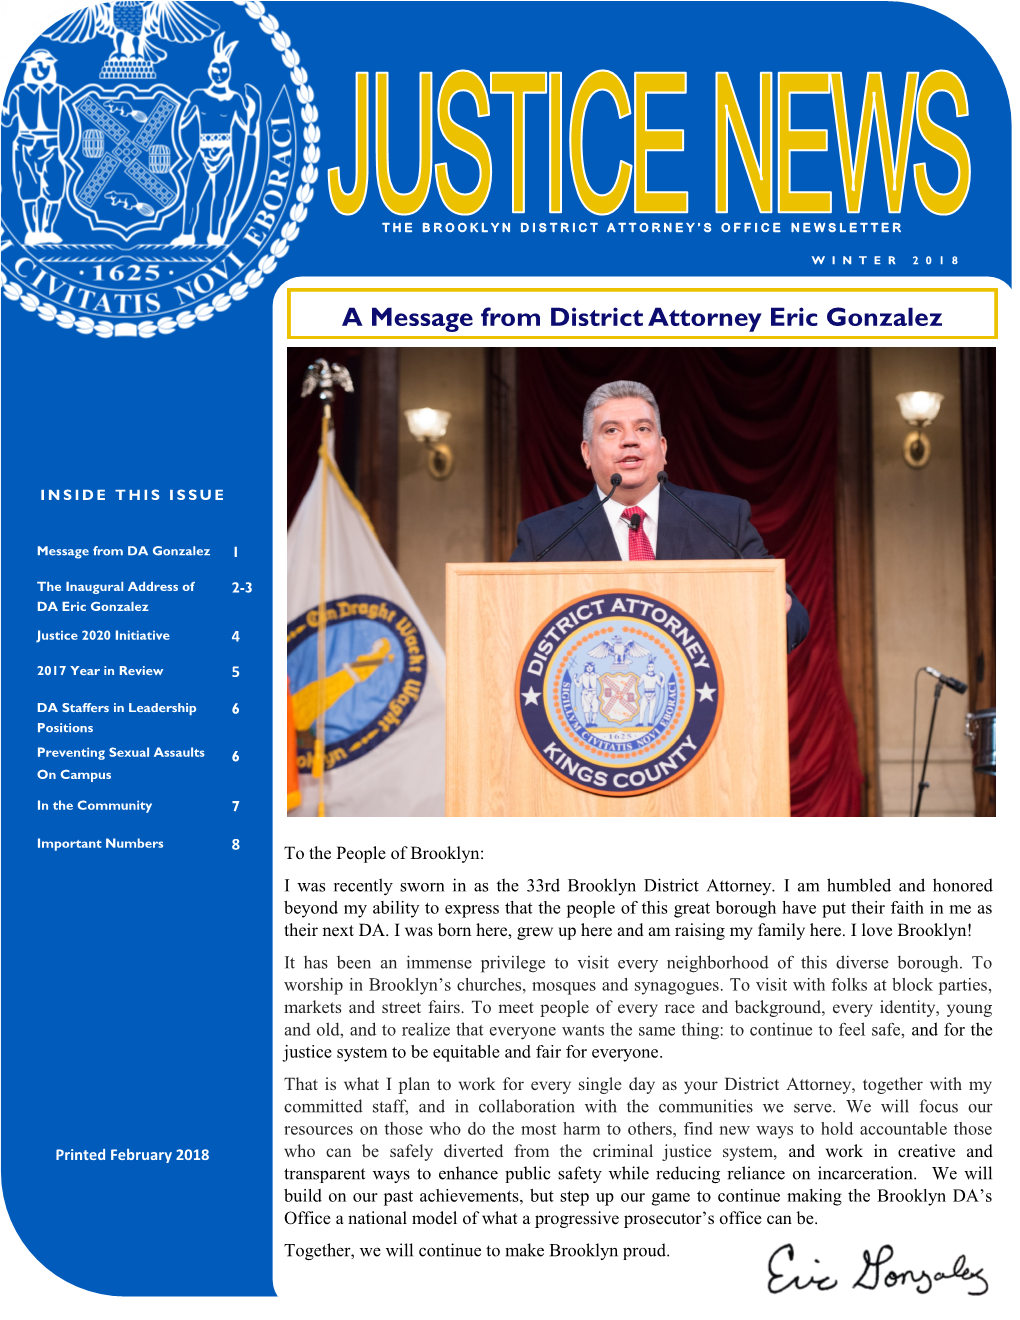 A Message from District Attorney Eric Gonzalez